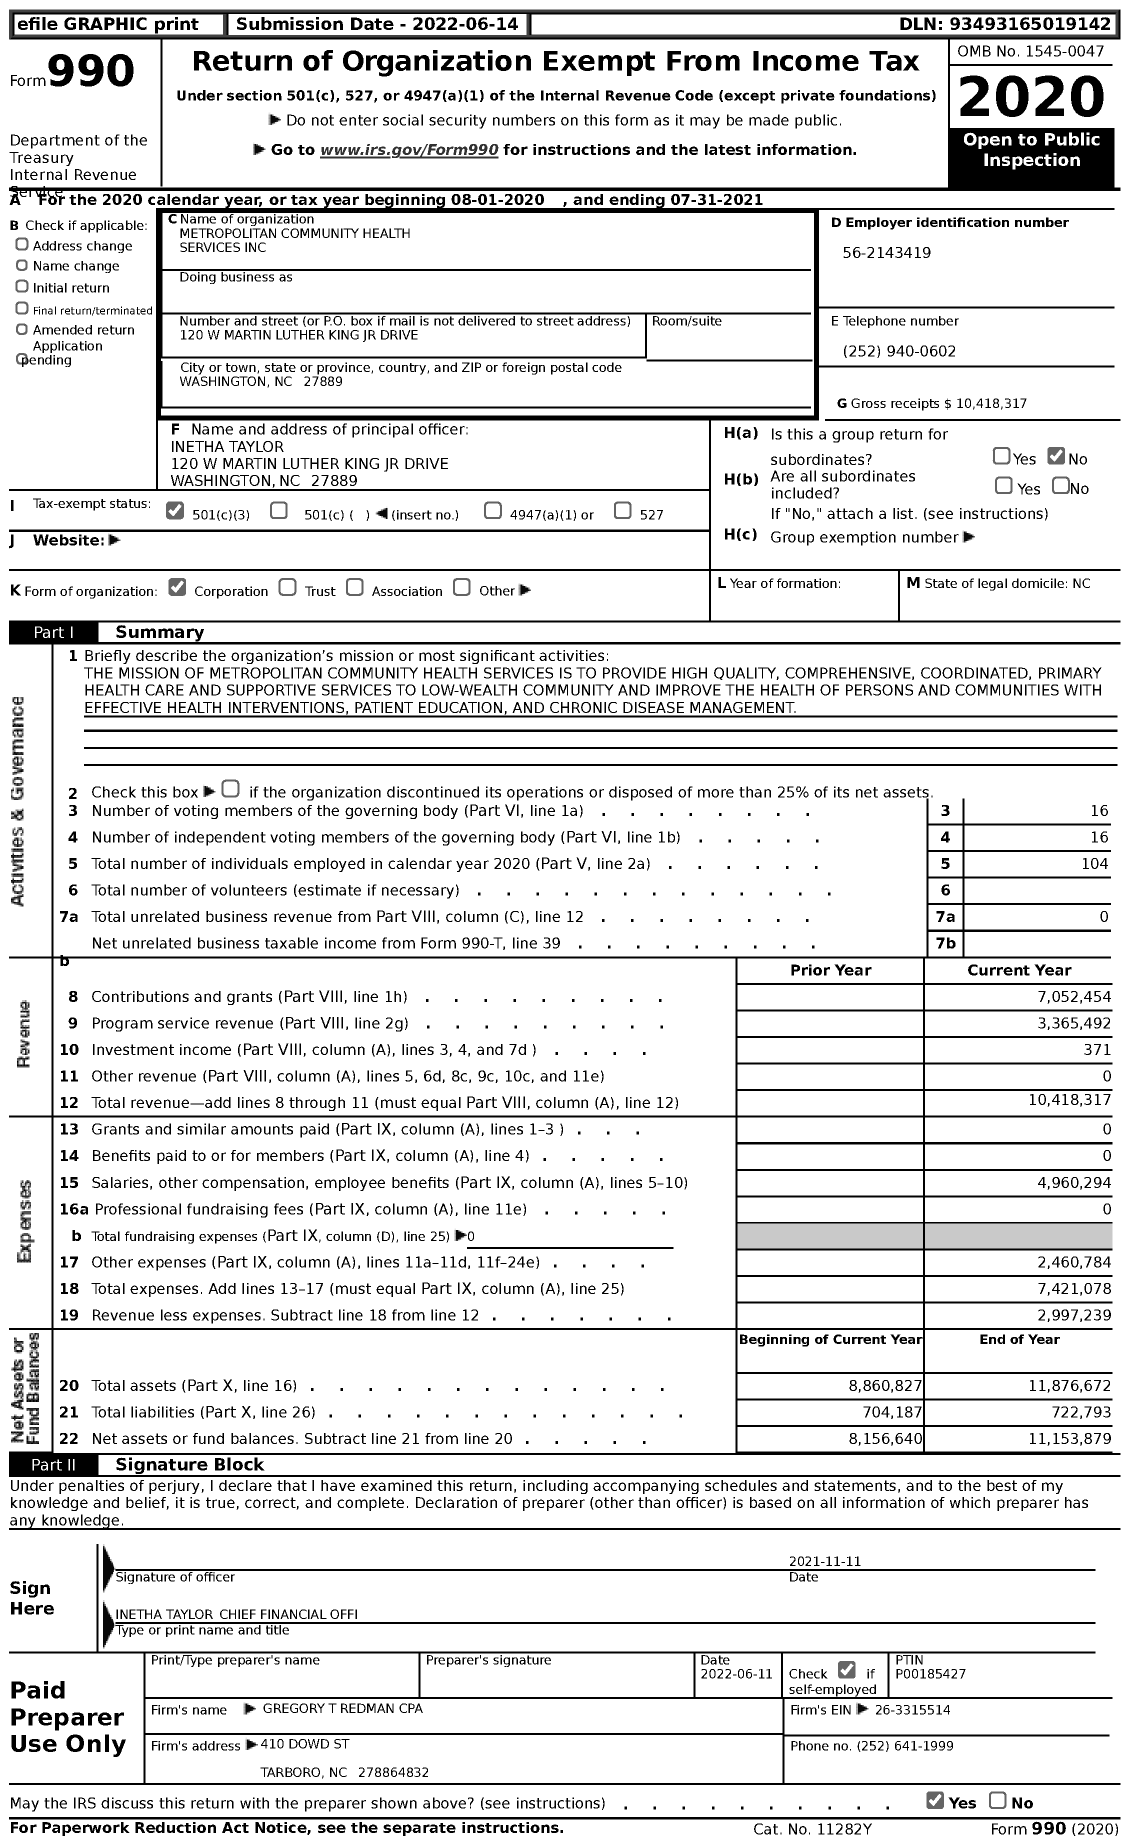 Image of first page of 2020 Form 990 for Metropolitan Community Health Services